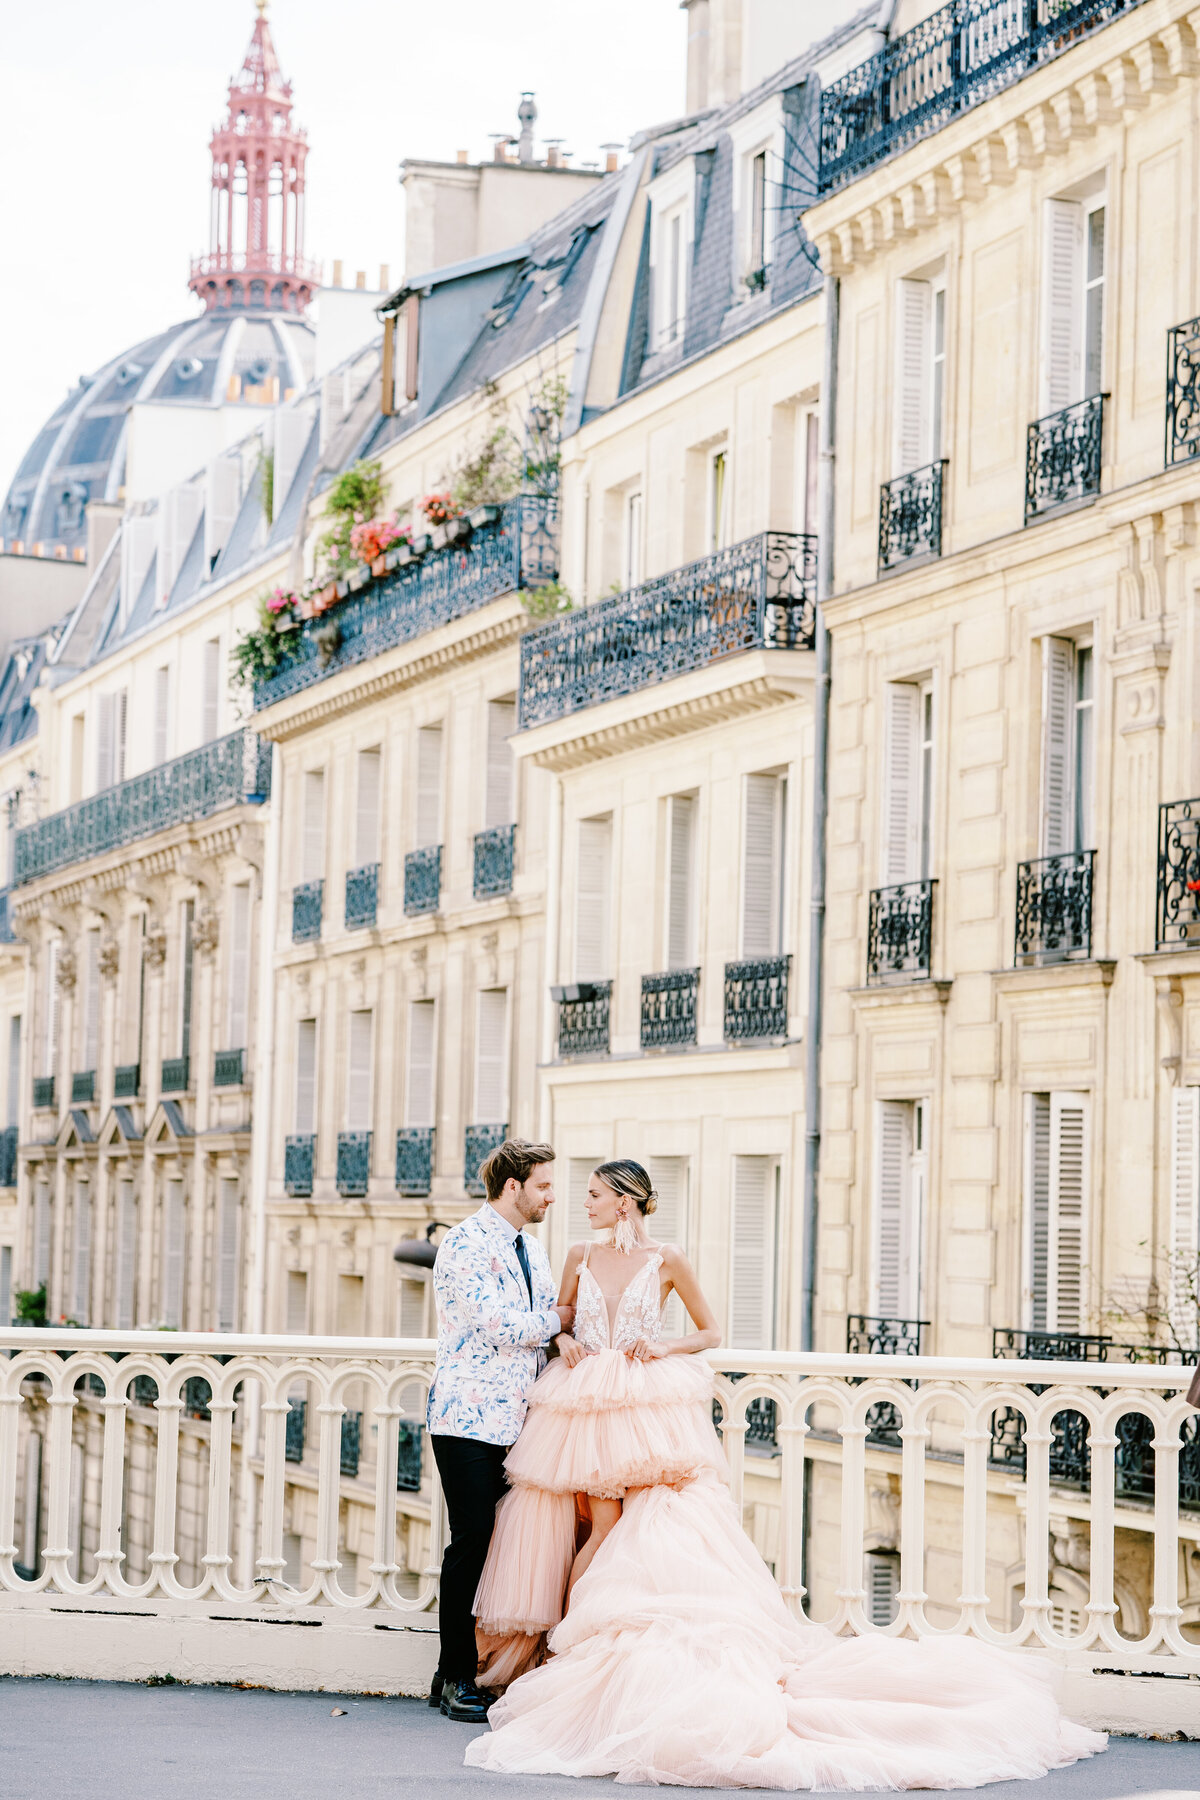 Couple on bridge with Paris homes behind them she is wearing a hi-lo peach gown leaning on the bridge looking at her future groom during their Paris engagement session, photographed by Italy wedding photographer.